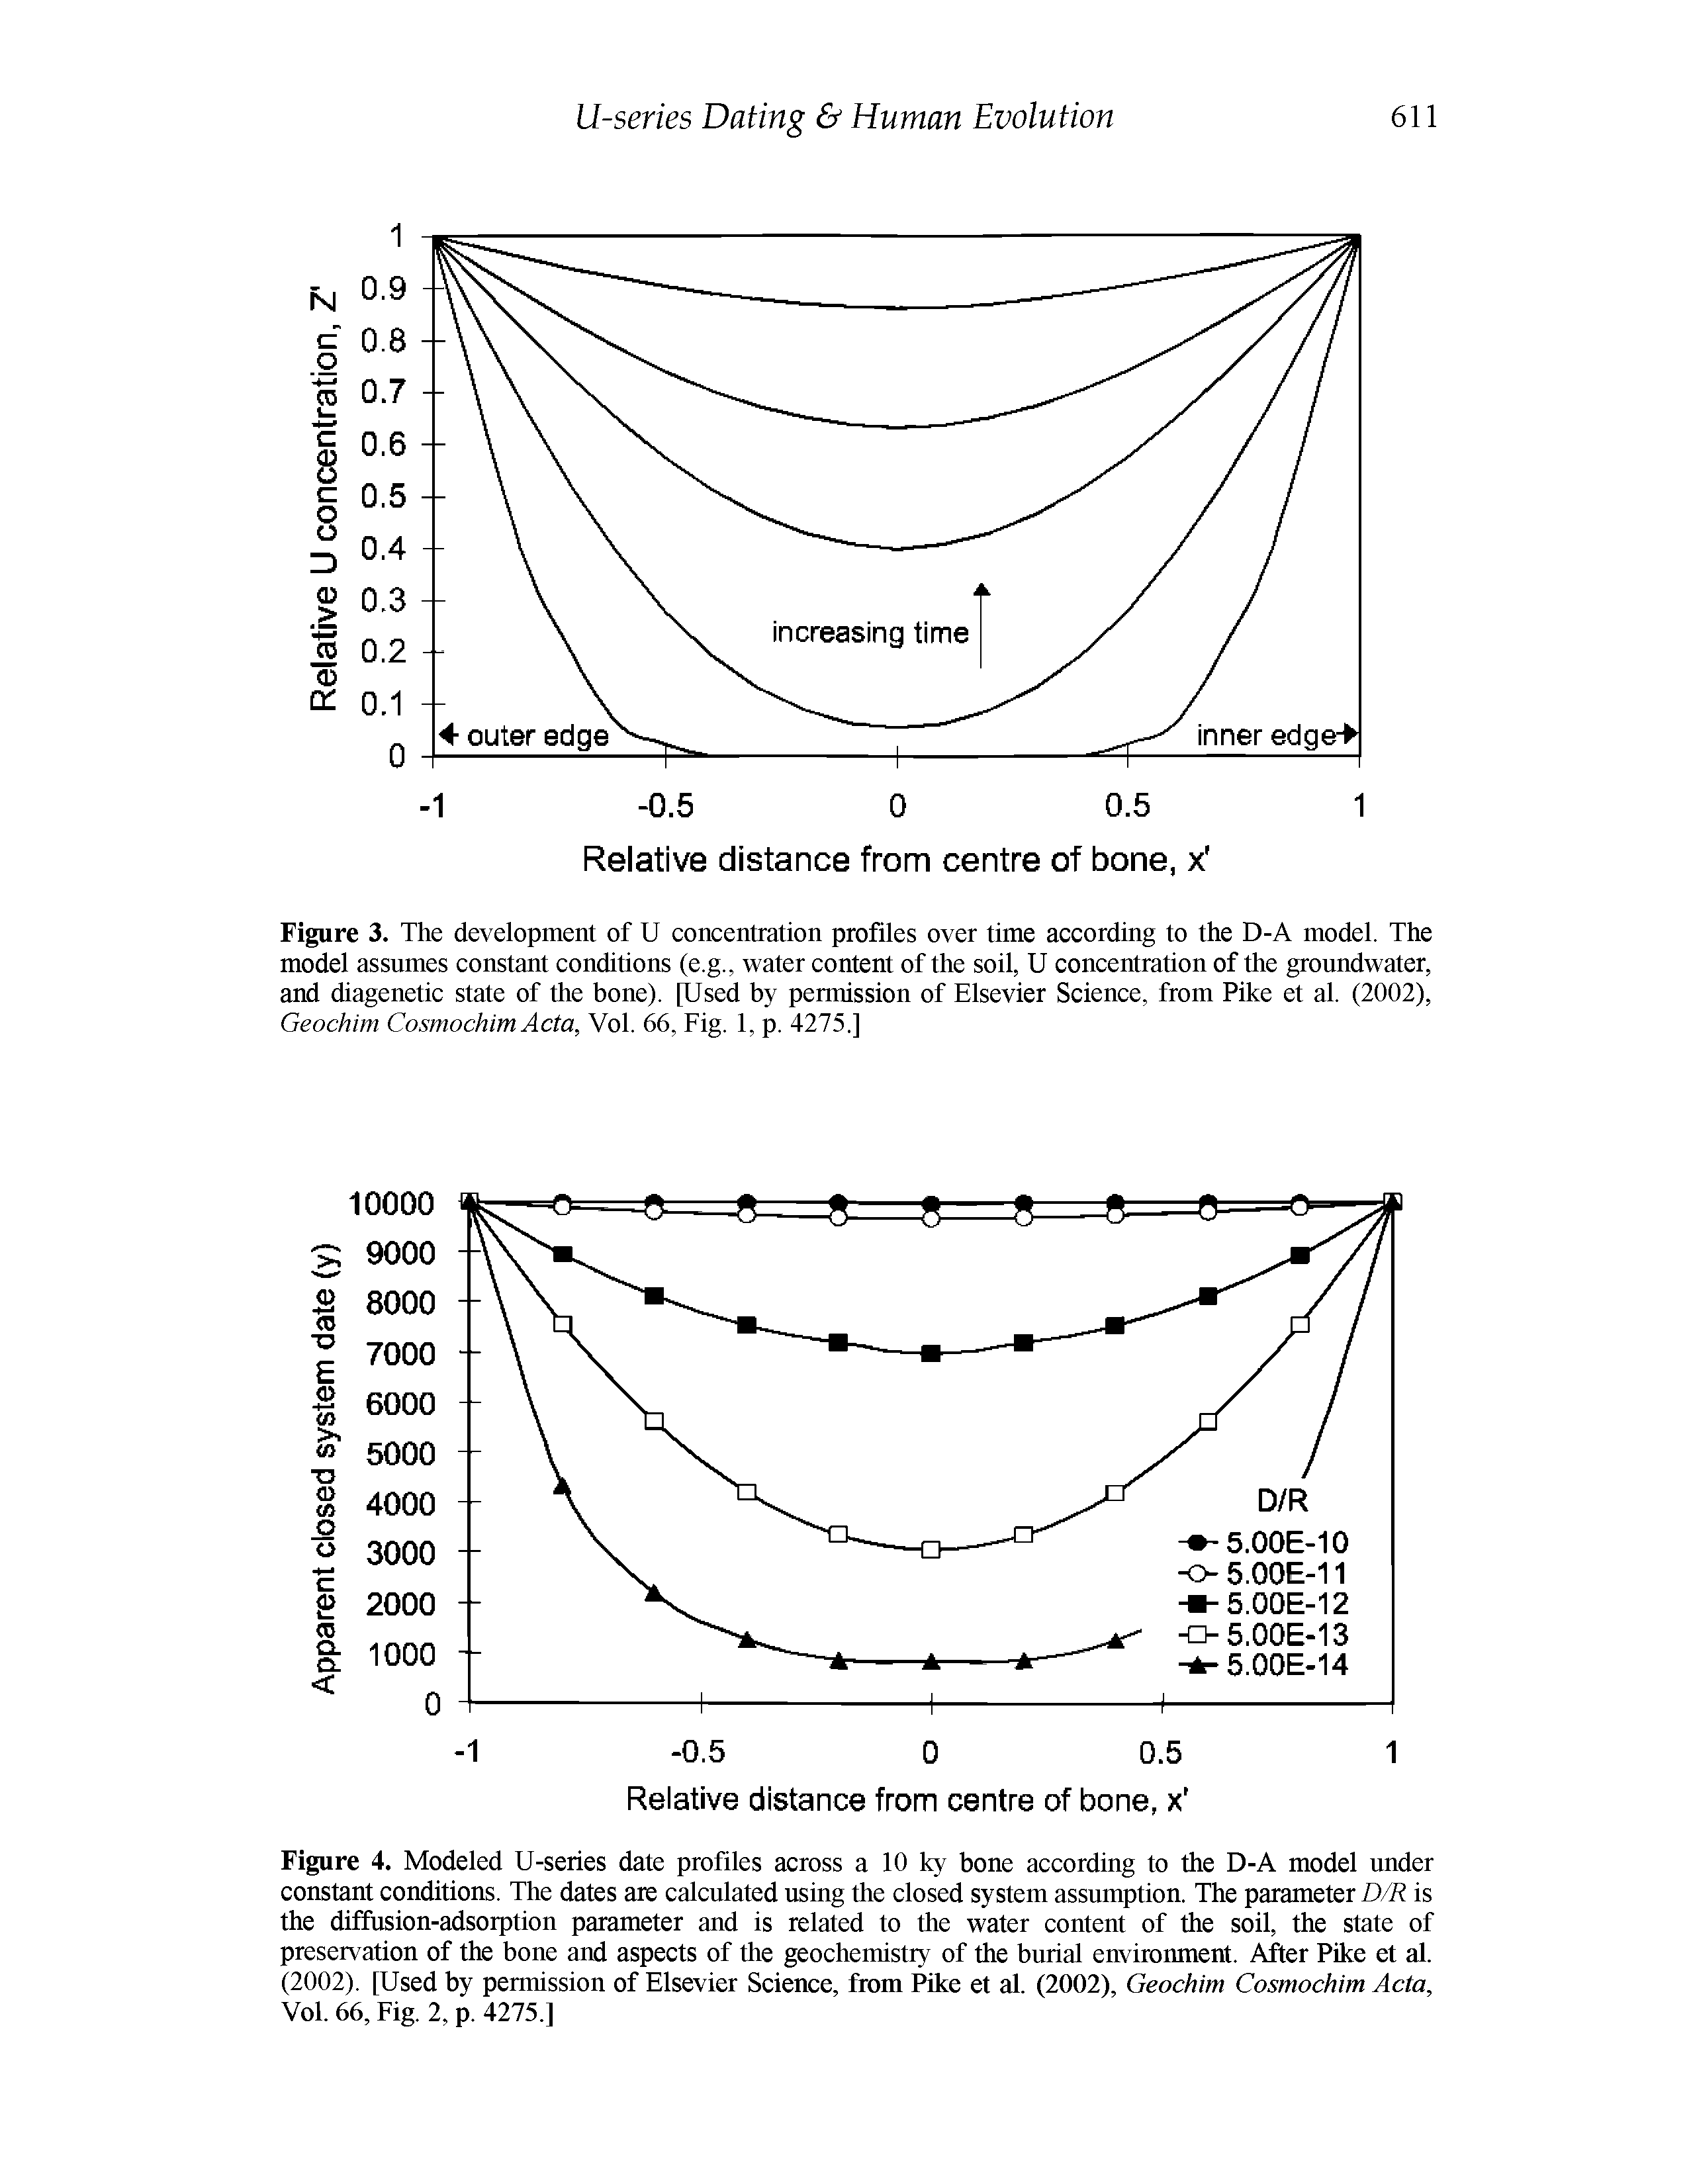 Figure 4. Modeled U-series date profiles across a 10 ky bone according to the D-A model under constant conditions. The dates are calculated using the closed system assumption. The parameter D/R is the diffusion-adsorption parameter and is related to the water content of the soil, the state of preservation of the bone and aspects of the geochemistry of the burial environment. After Pike et al. (2002). [Used by permission of Elsevier Science, from Pike et al. (2002), Geochim Cosmochim Acta, Vol. 66, Fig. 2, p. 4275.]...